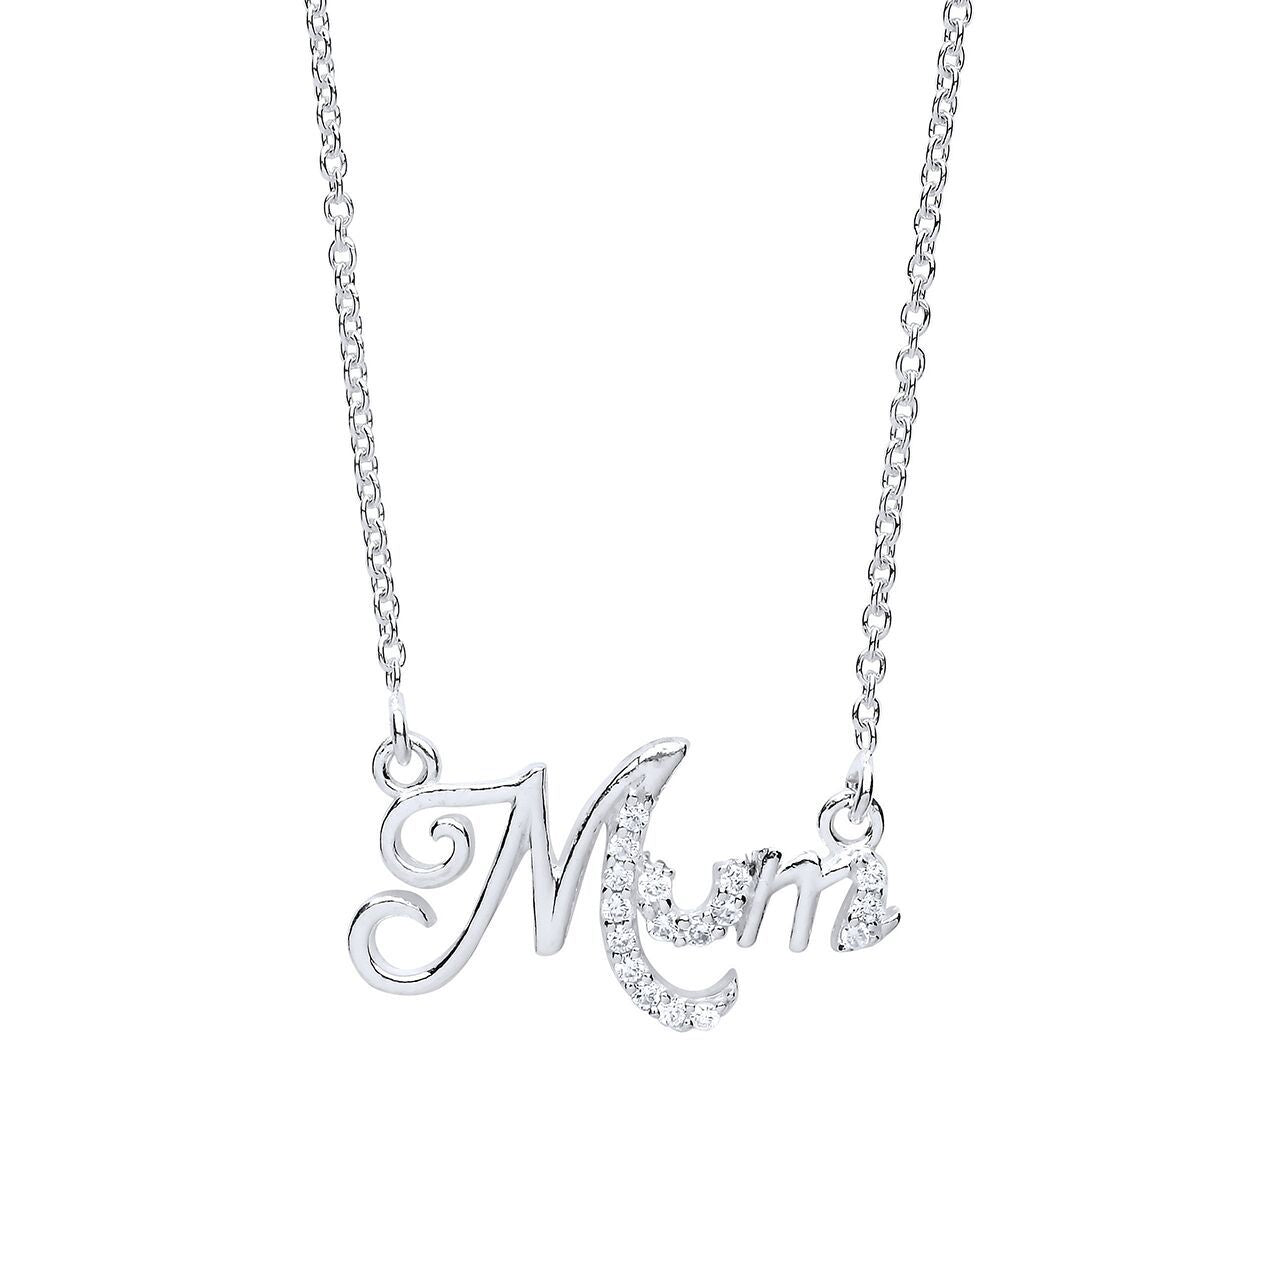 Silver Mum Necklace with Cubic Zirconia's Jewellery Ian Dunford 